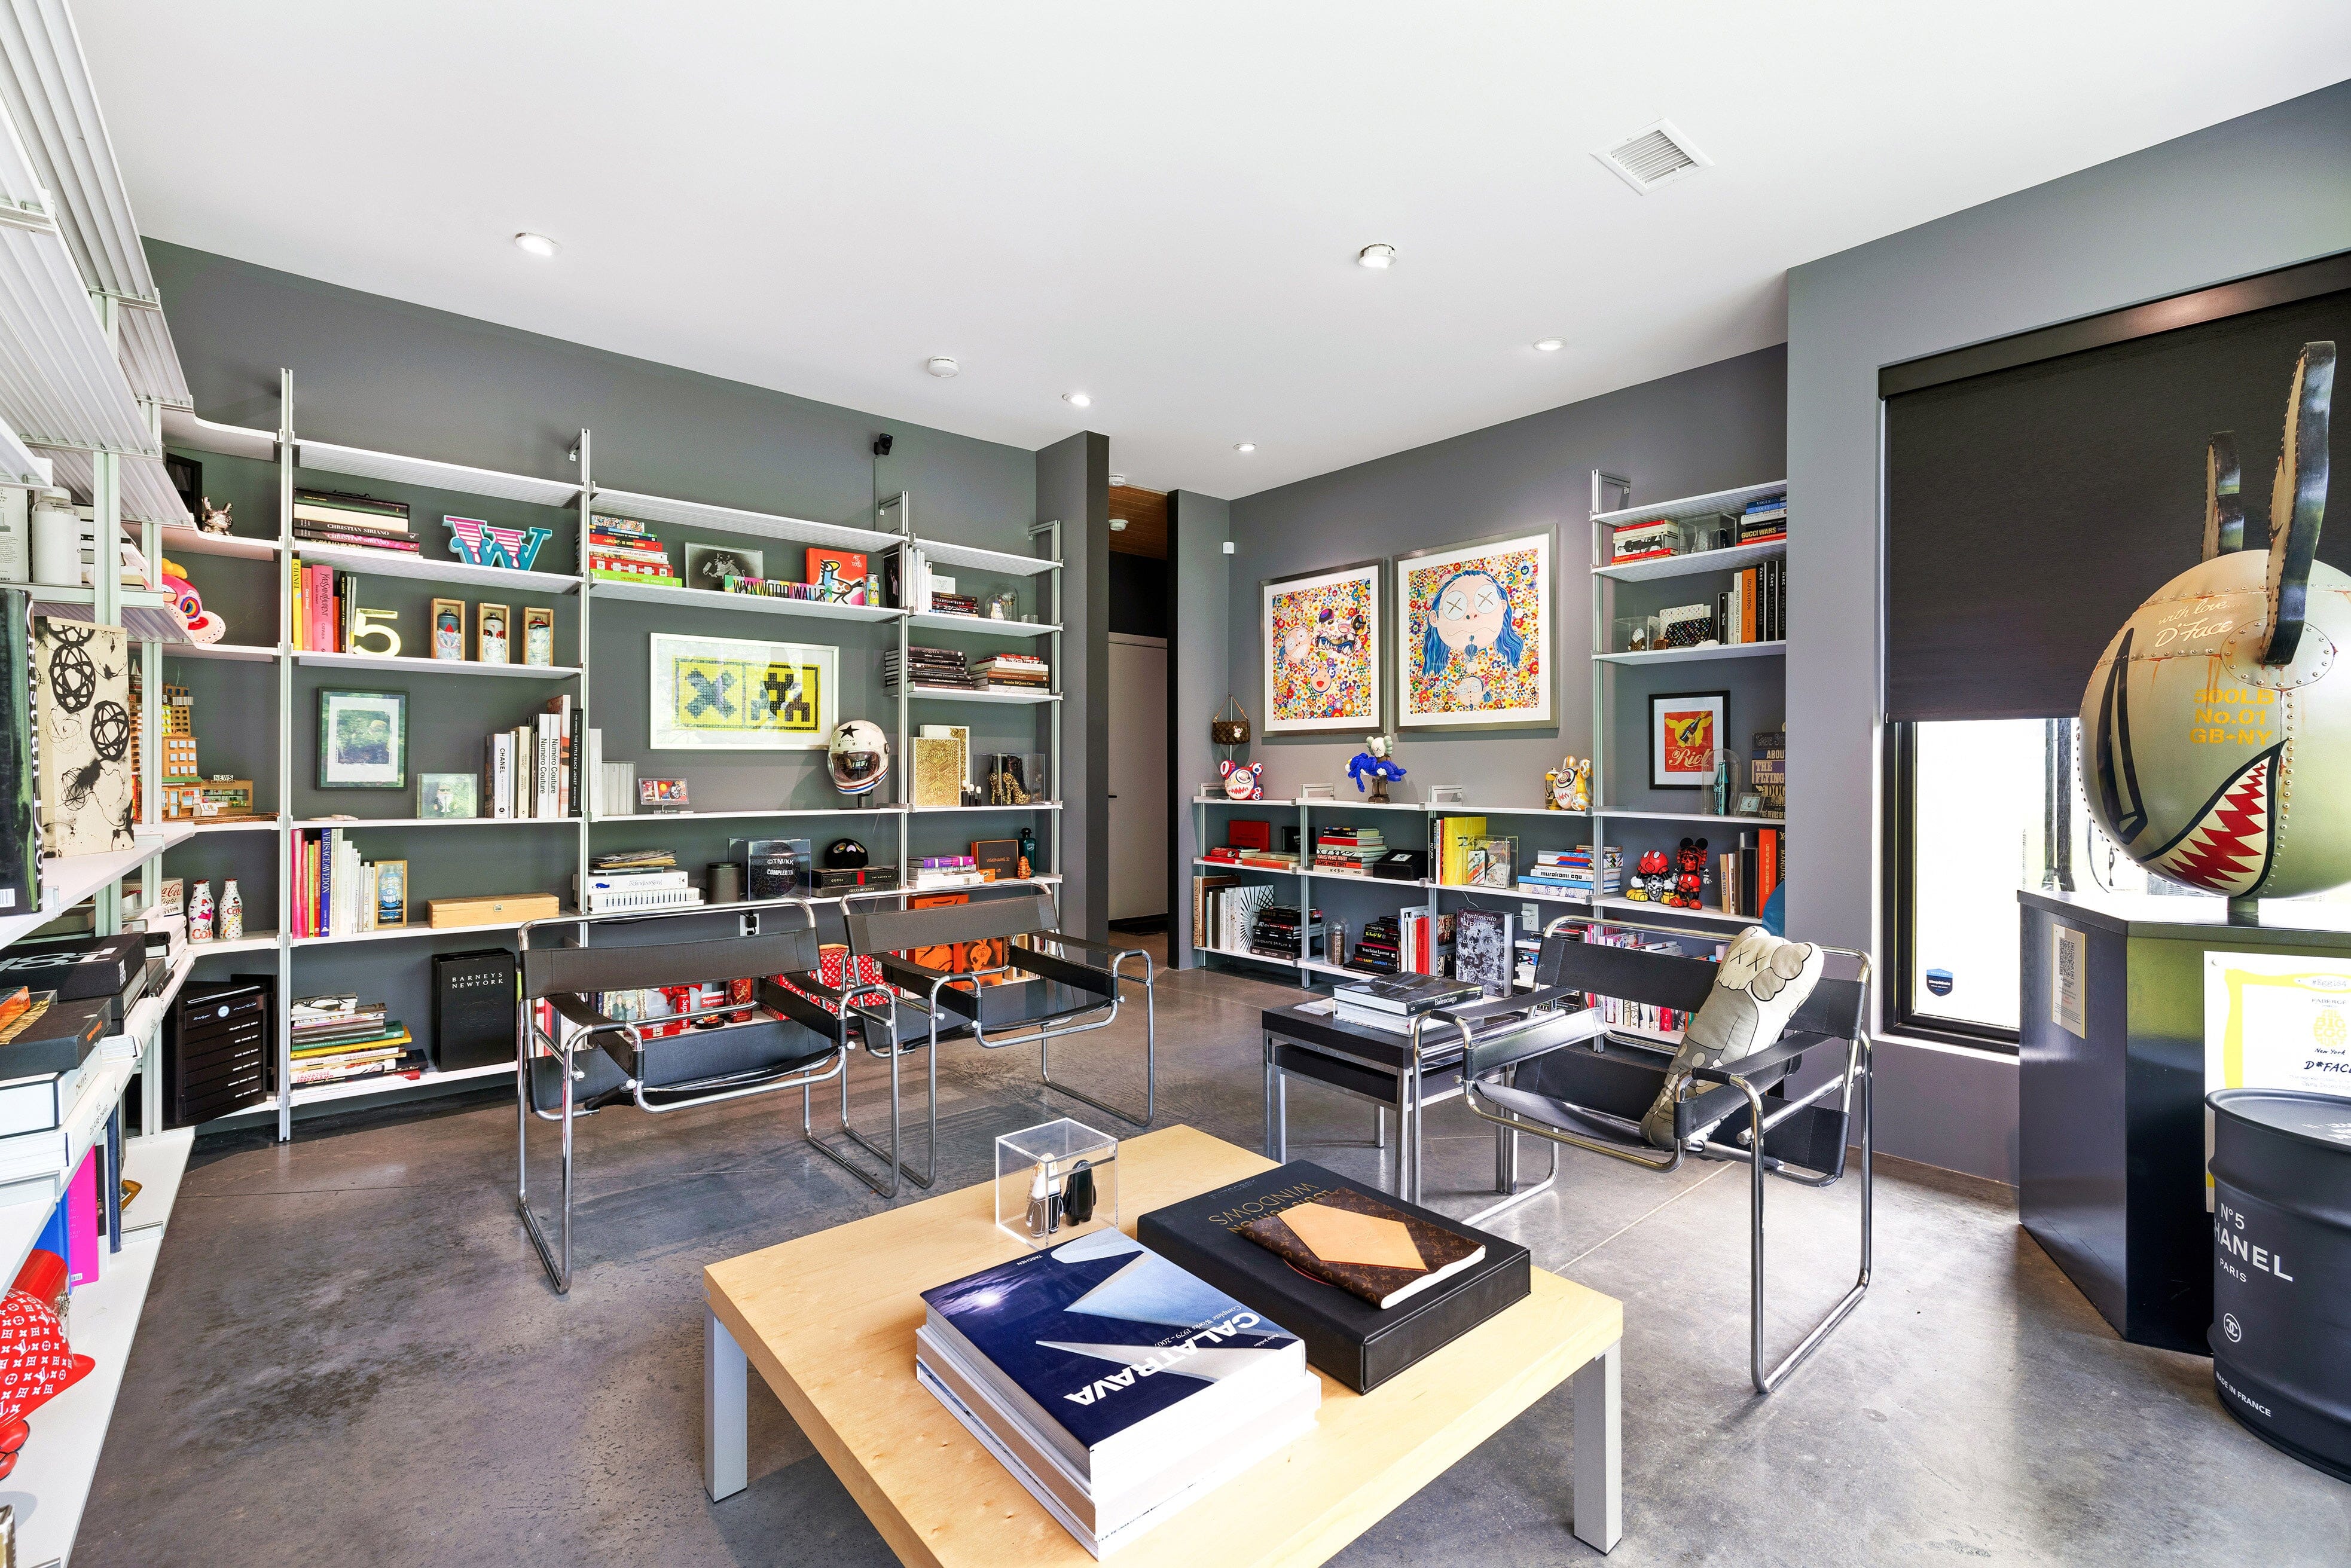 Renowned Designer Uses Modern Shelving Shelves to Complete His Dream Home